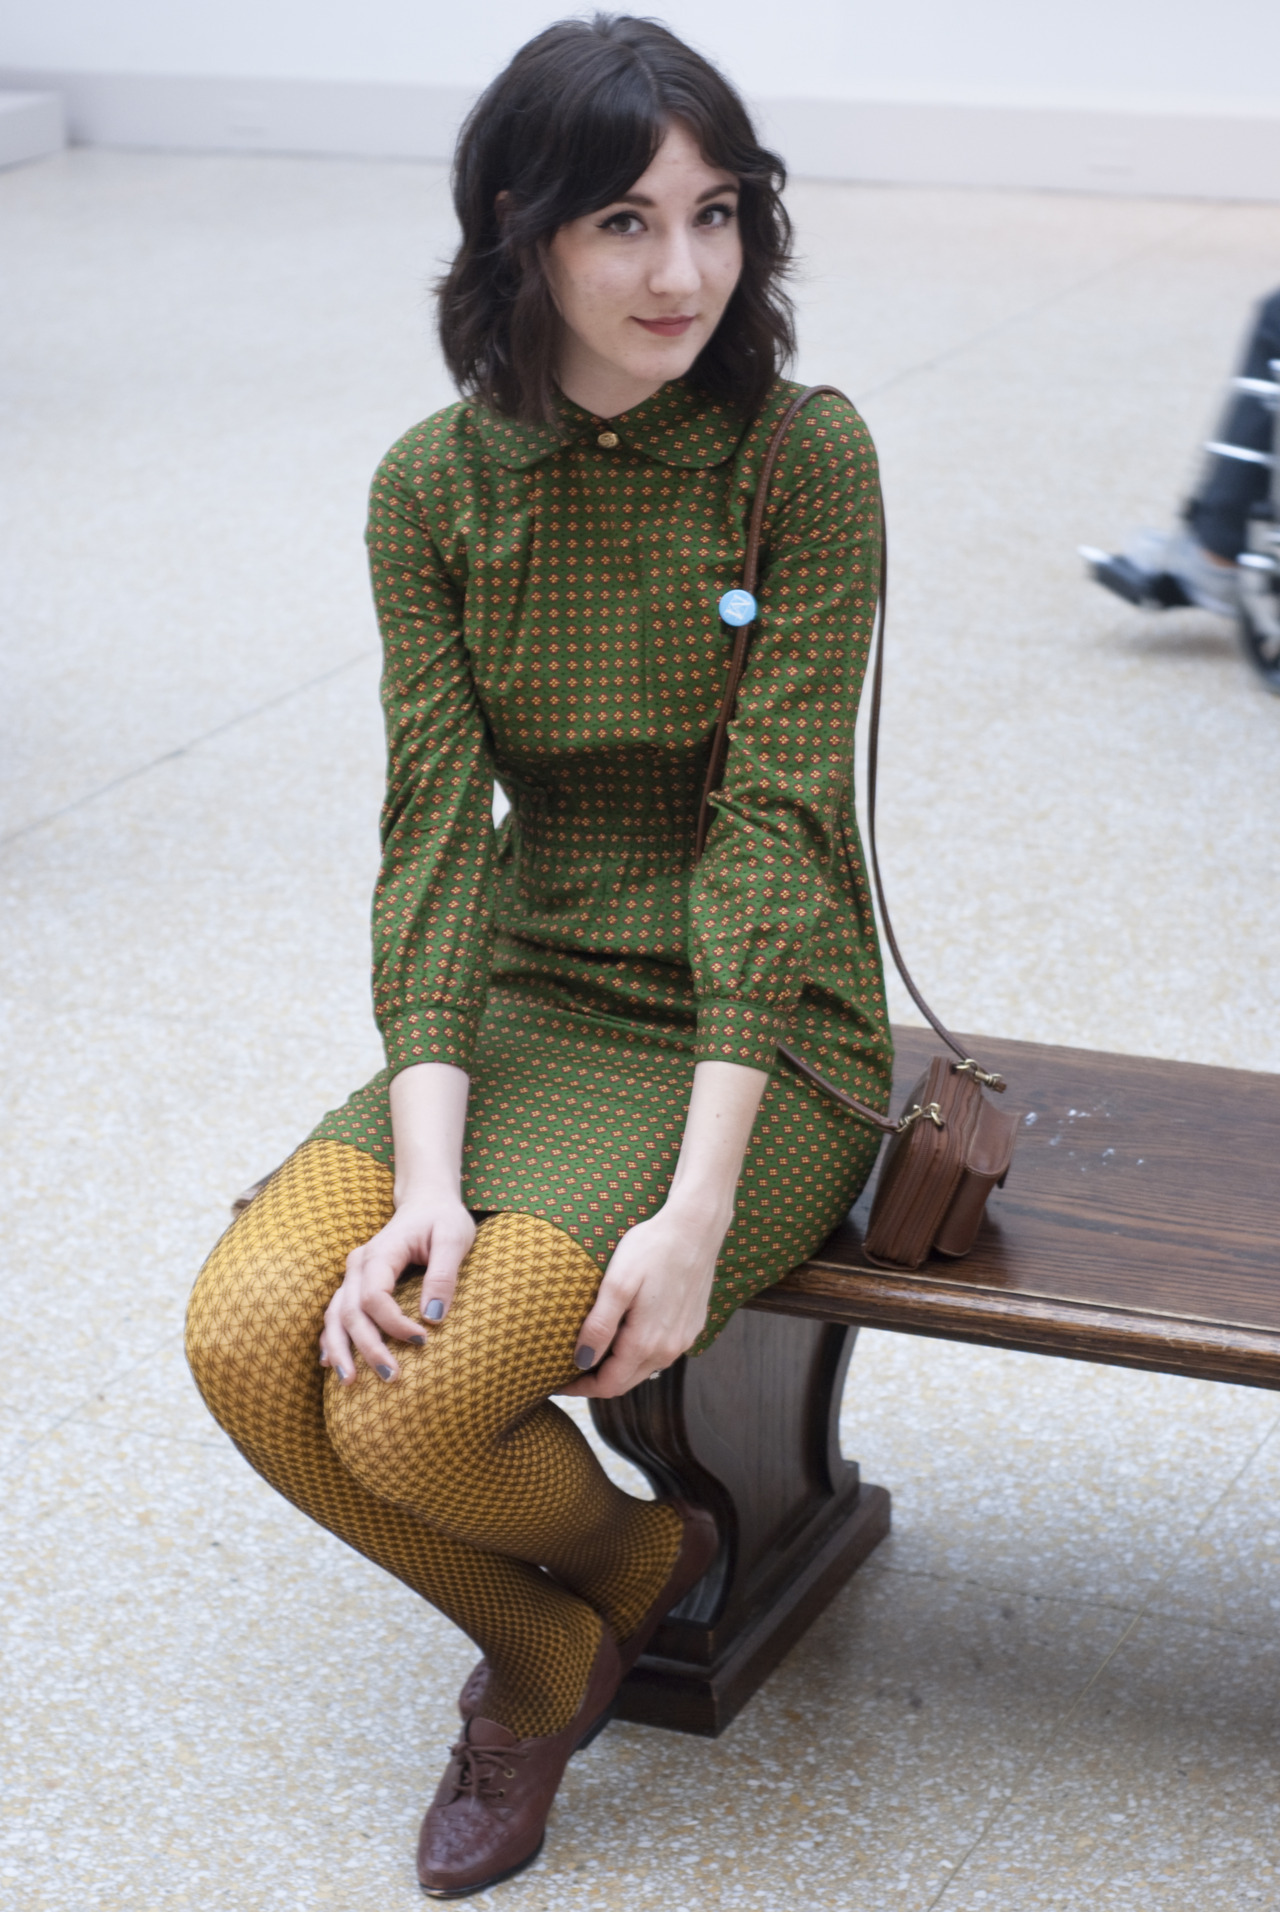 Patterned Tights Are An Easy Way To Spice Up Any Outfit